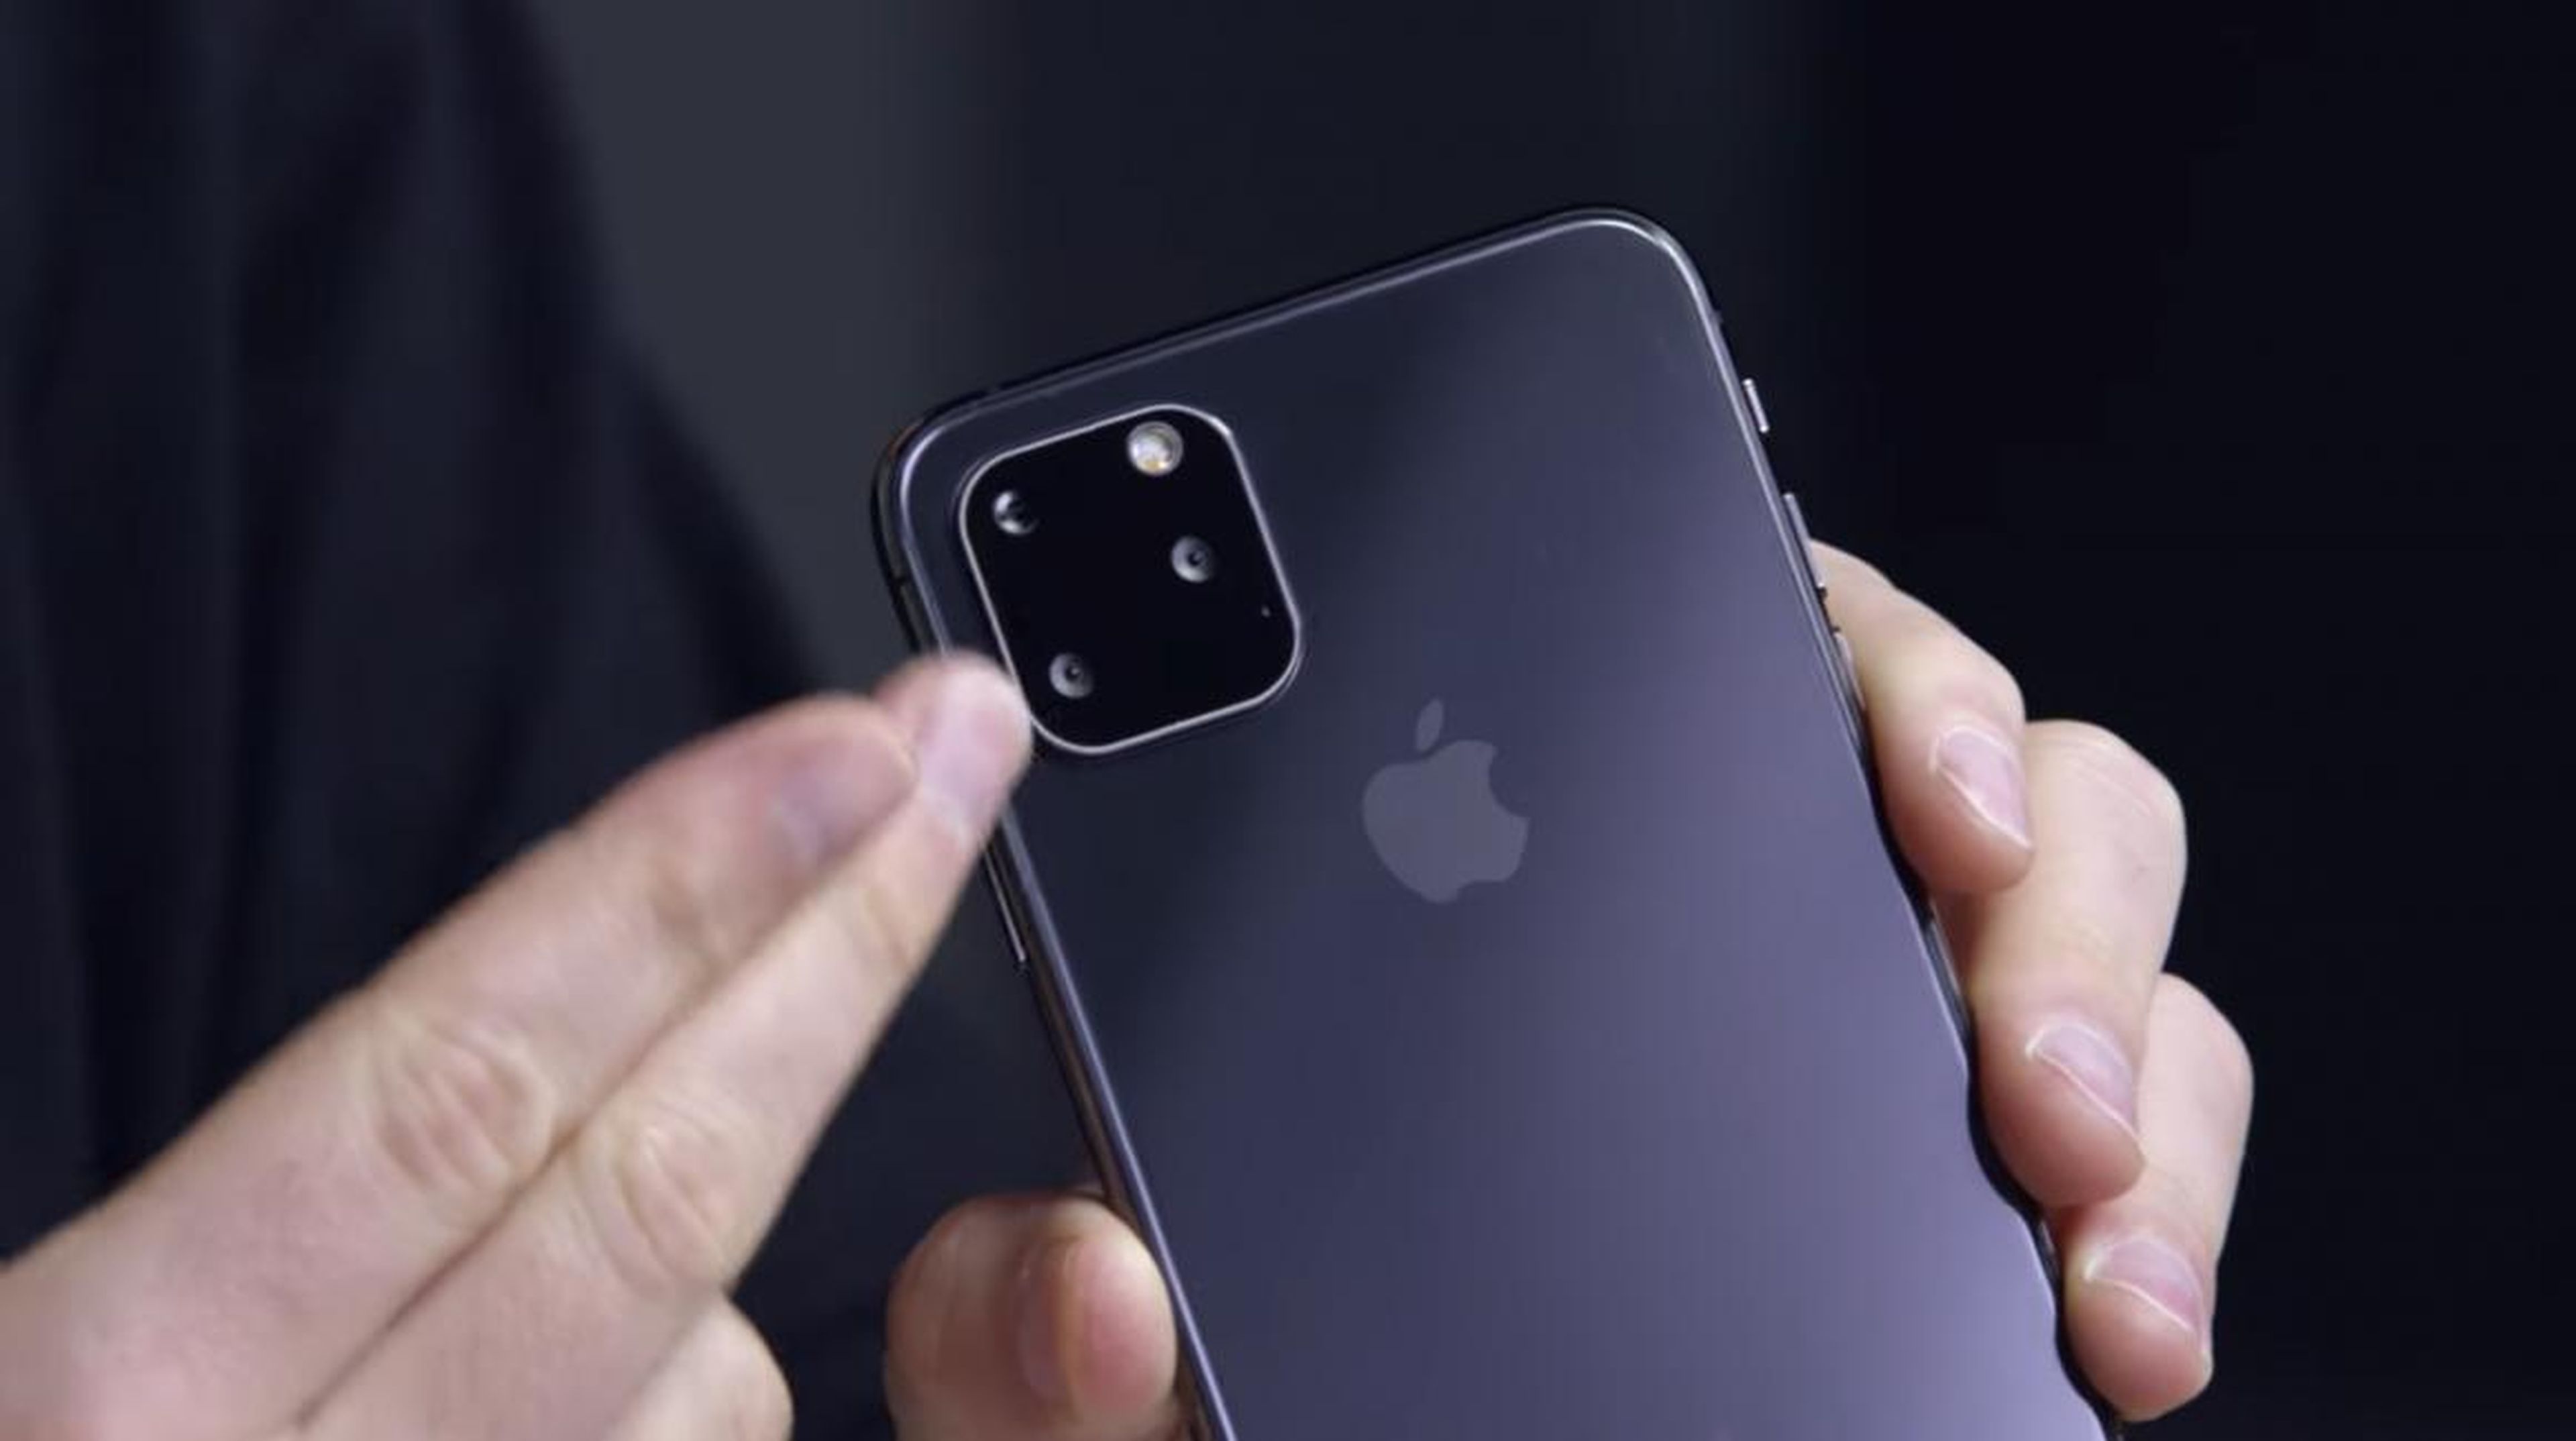 The biggest and most obvious change, of course, is the rear camera system. By all accounts, Apple is incorporating a three-lens system, adding a super-wide lens for the first time. How it will use this new hardware to create novel